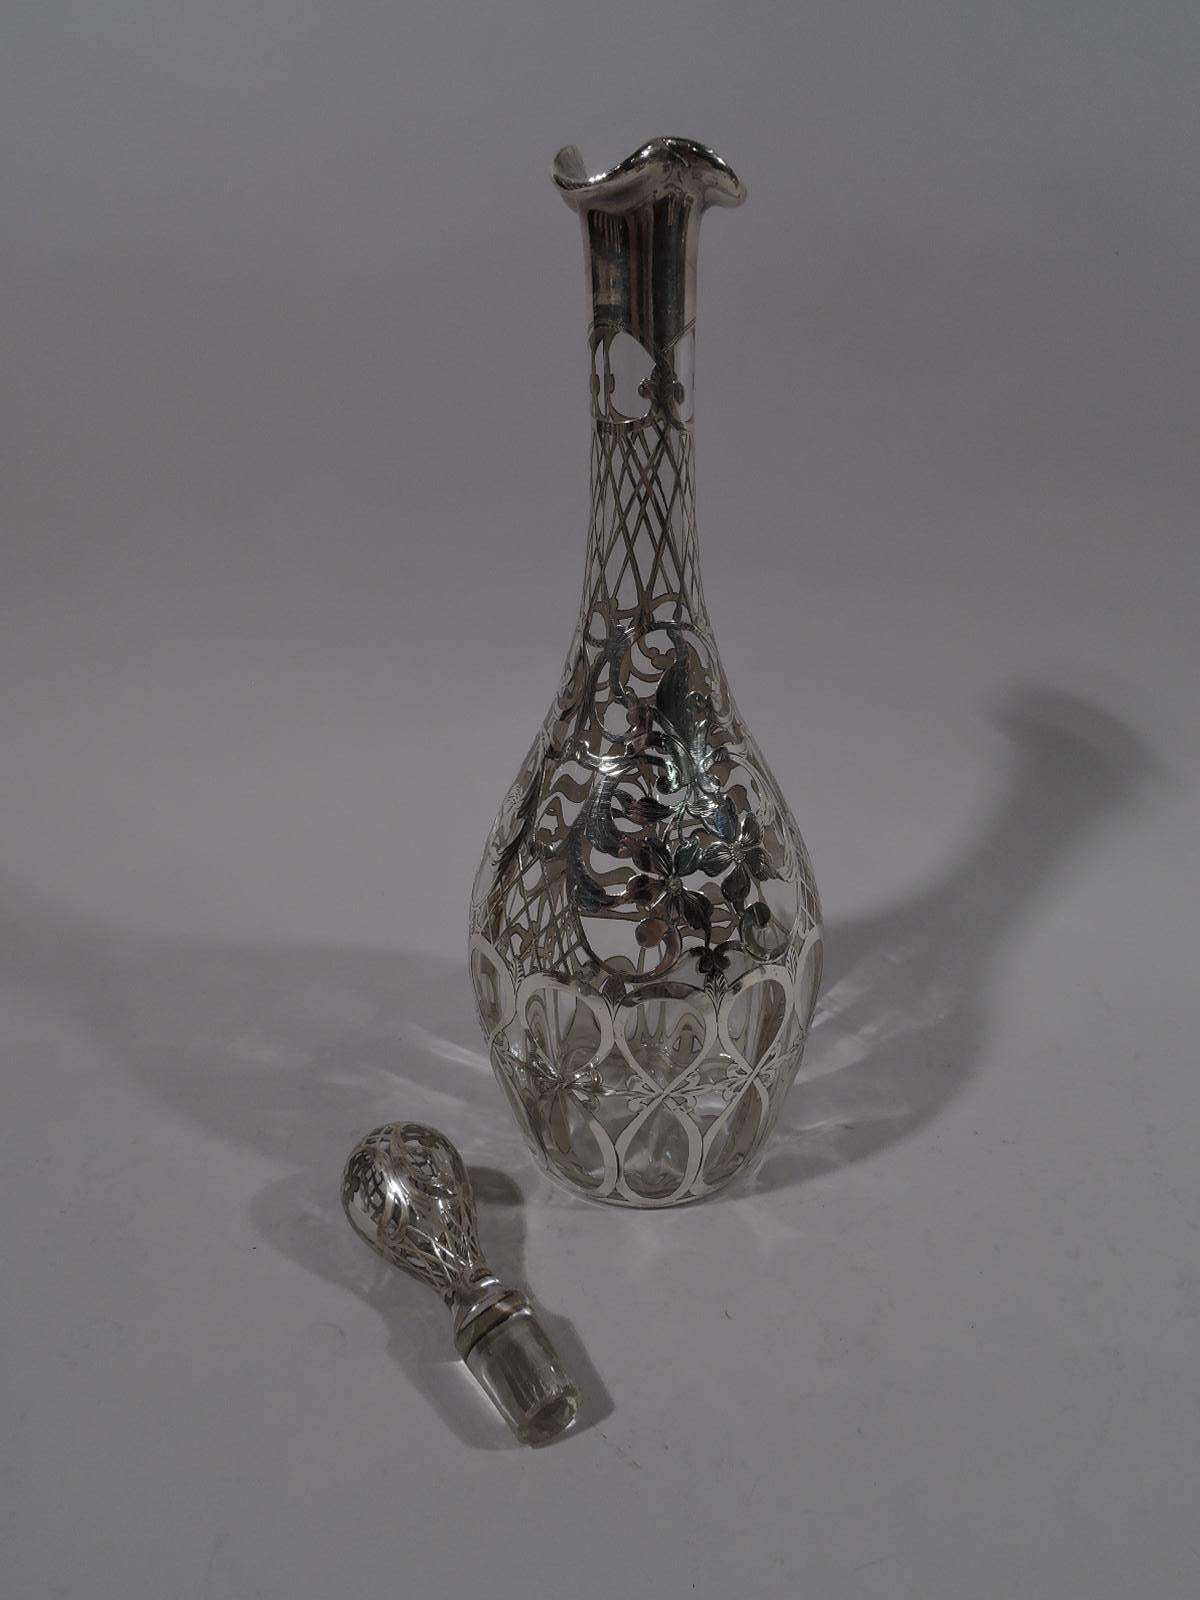 Turn-of-the-century Art Nouveau glass decanter with engraved silver overlay. Made by Alvin in Providence. Ovoid with cylindrical neck and ruffly trefoil mouth in silver collar. Stopper ovoid. Overlay in form flowers, leafing scrolls, and diaper.